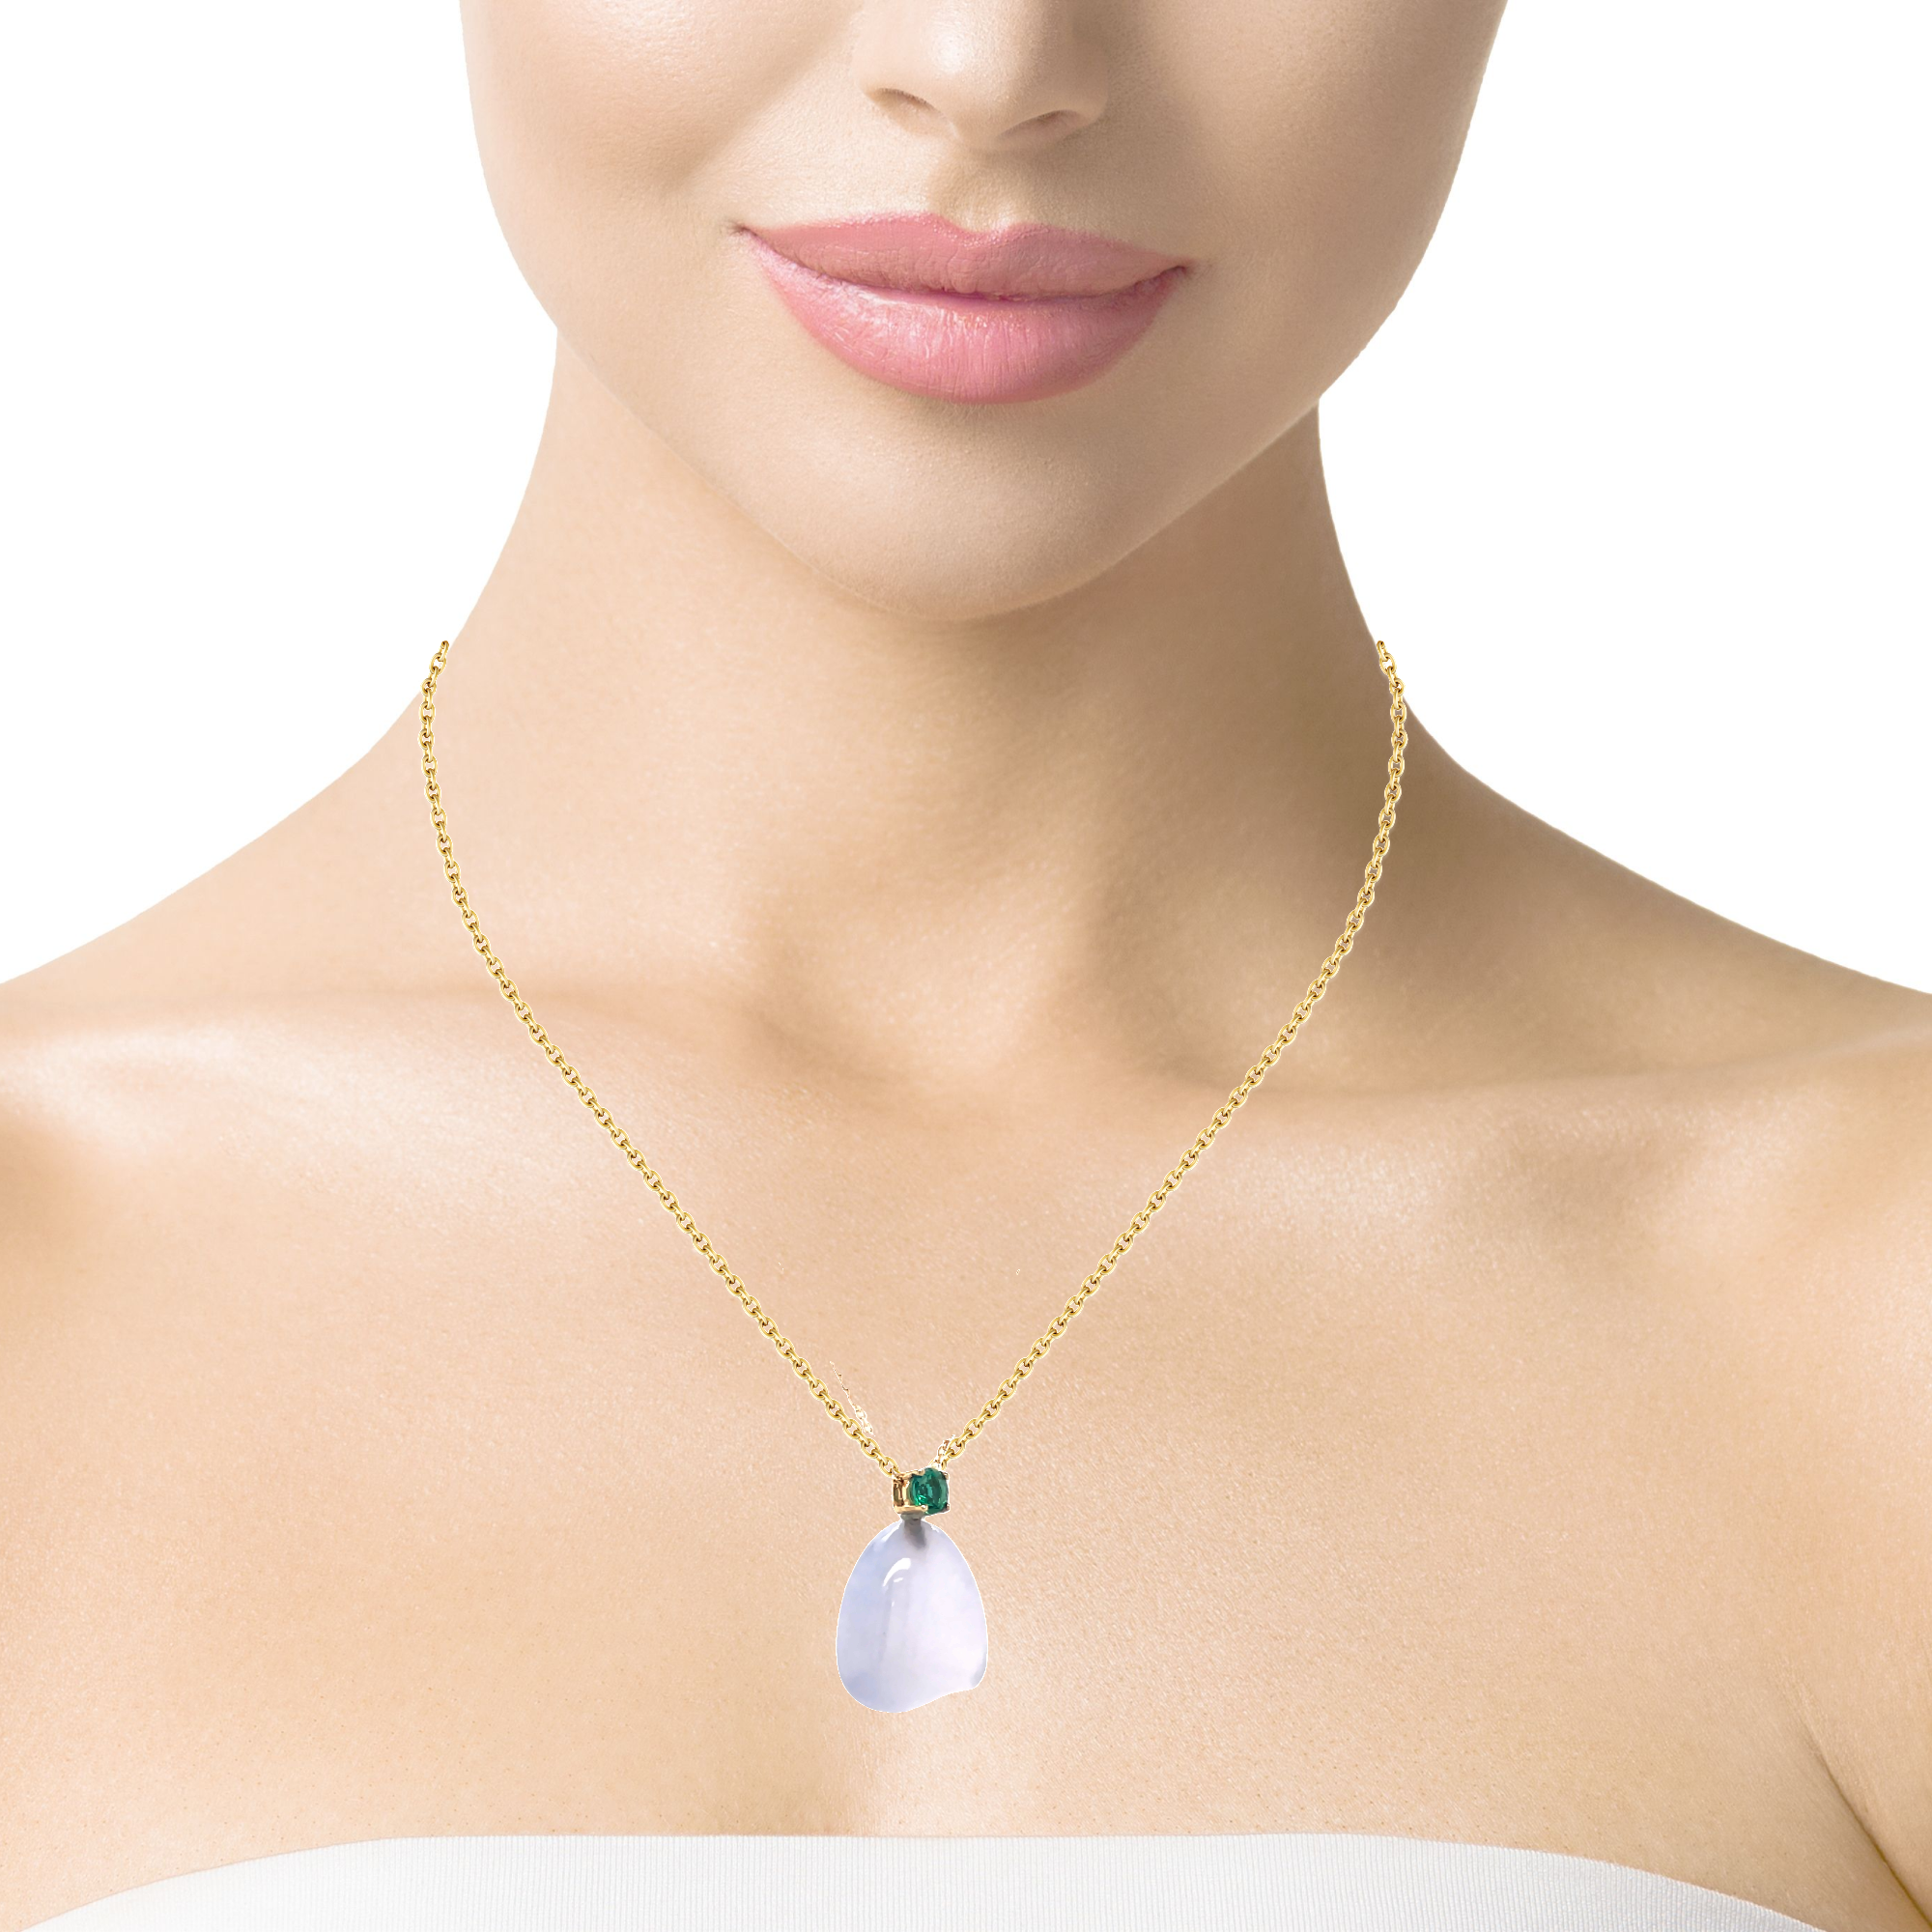 This timeless design blends traditional elements with modern trends to create a unique statement for any occasion. Crafted from 14k yellow gold and featuring a pear-shaped aquamarine cabochon, a round diamond, and an emerald cabochon, this pendant measures 19 x 14 mm and comes with a 16" long chain.